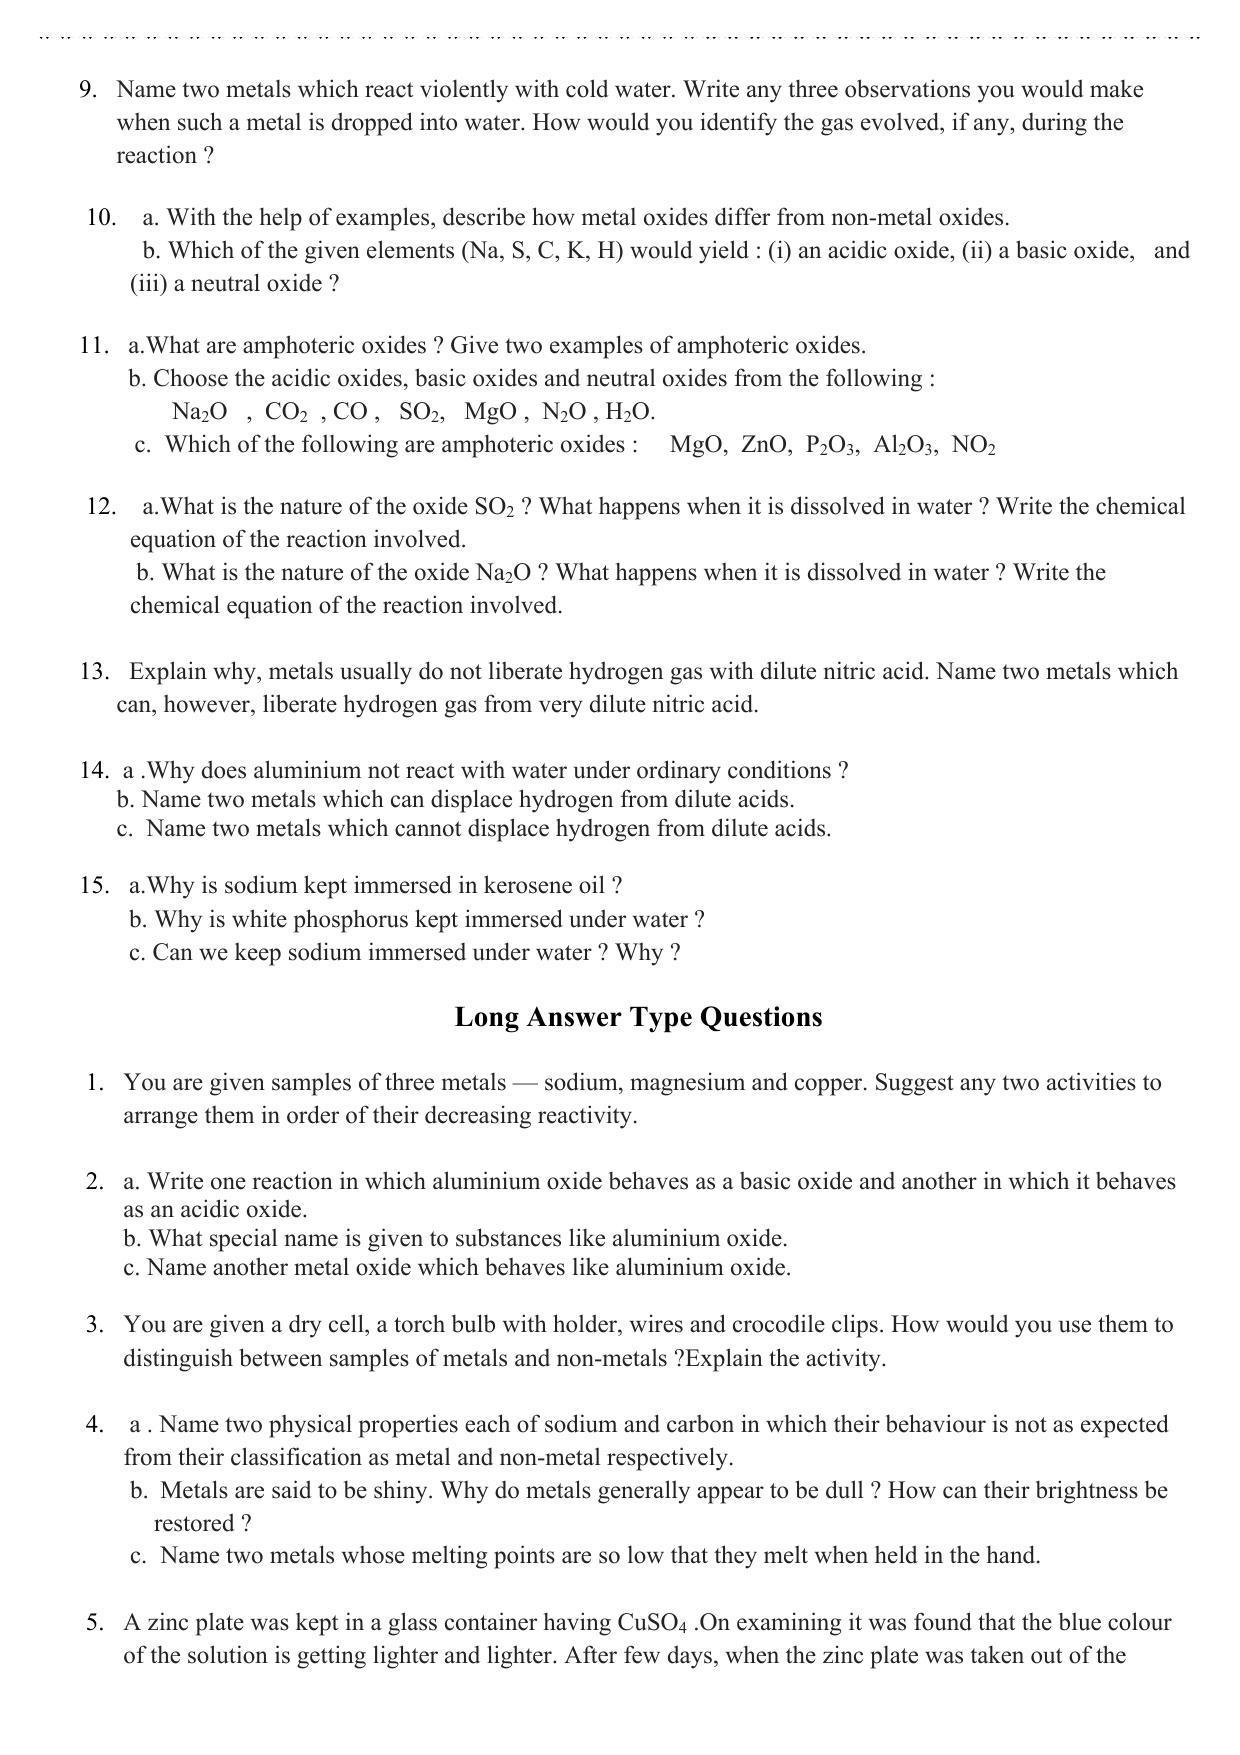 Edudel Class 10 Science Question Bank - Page 16